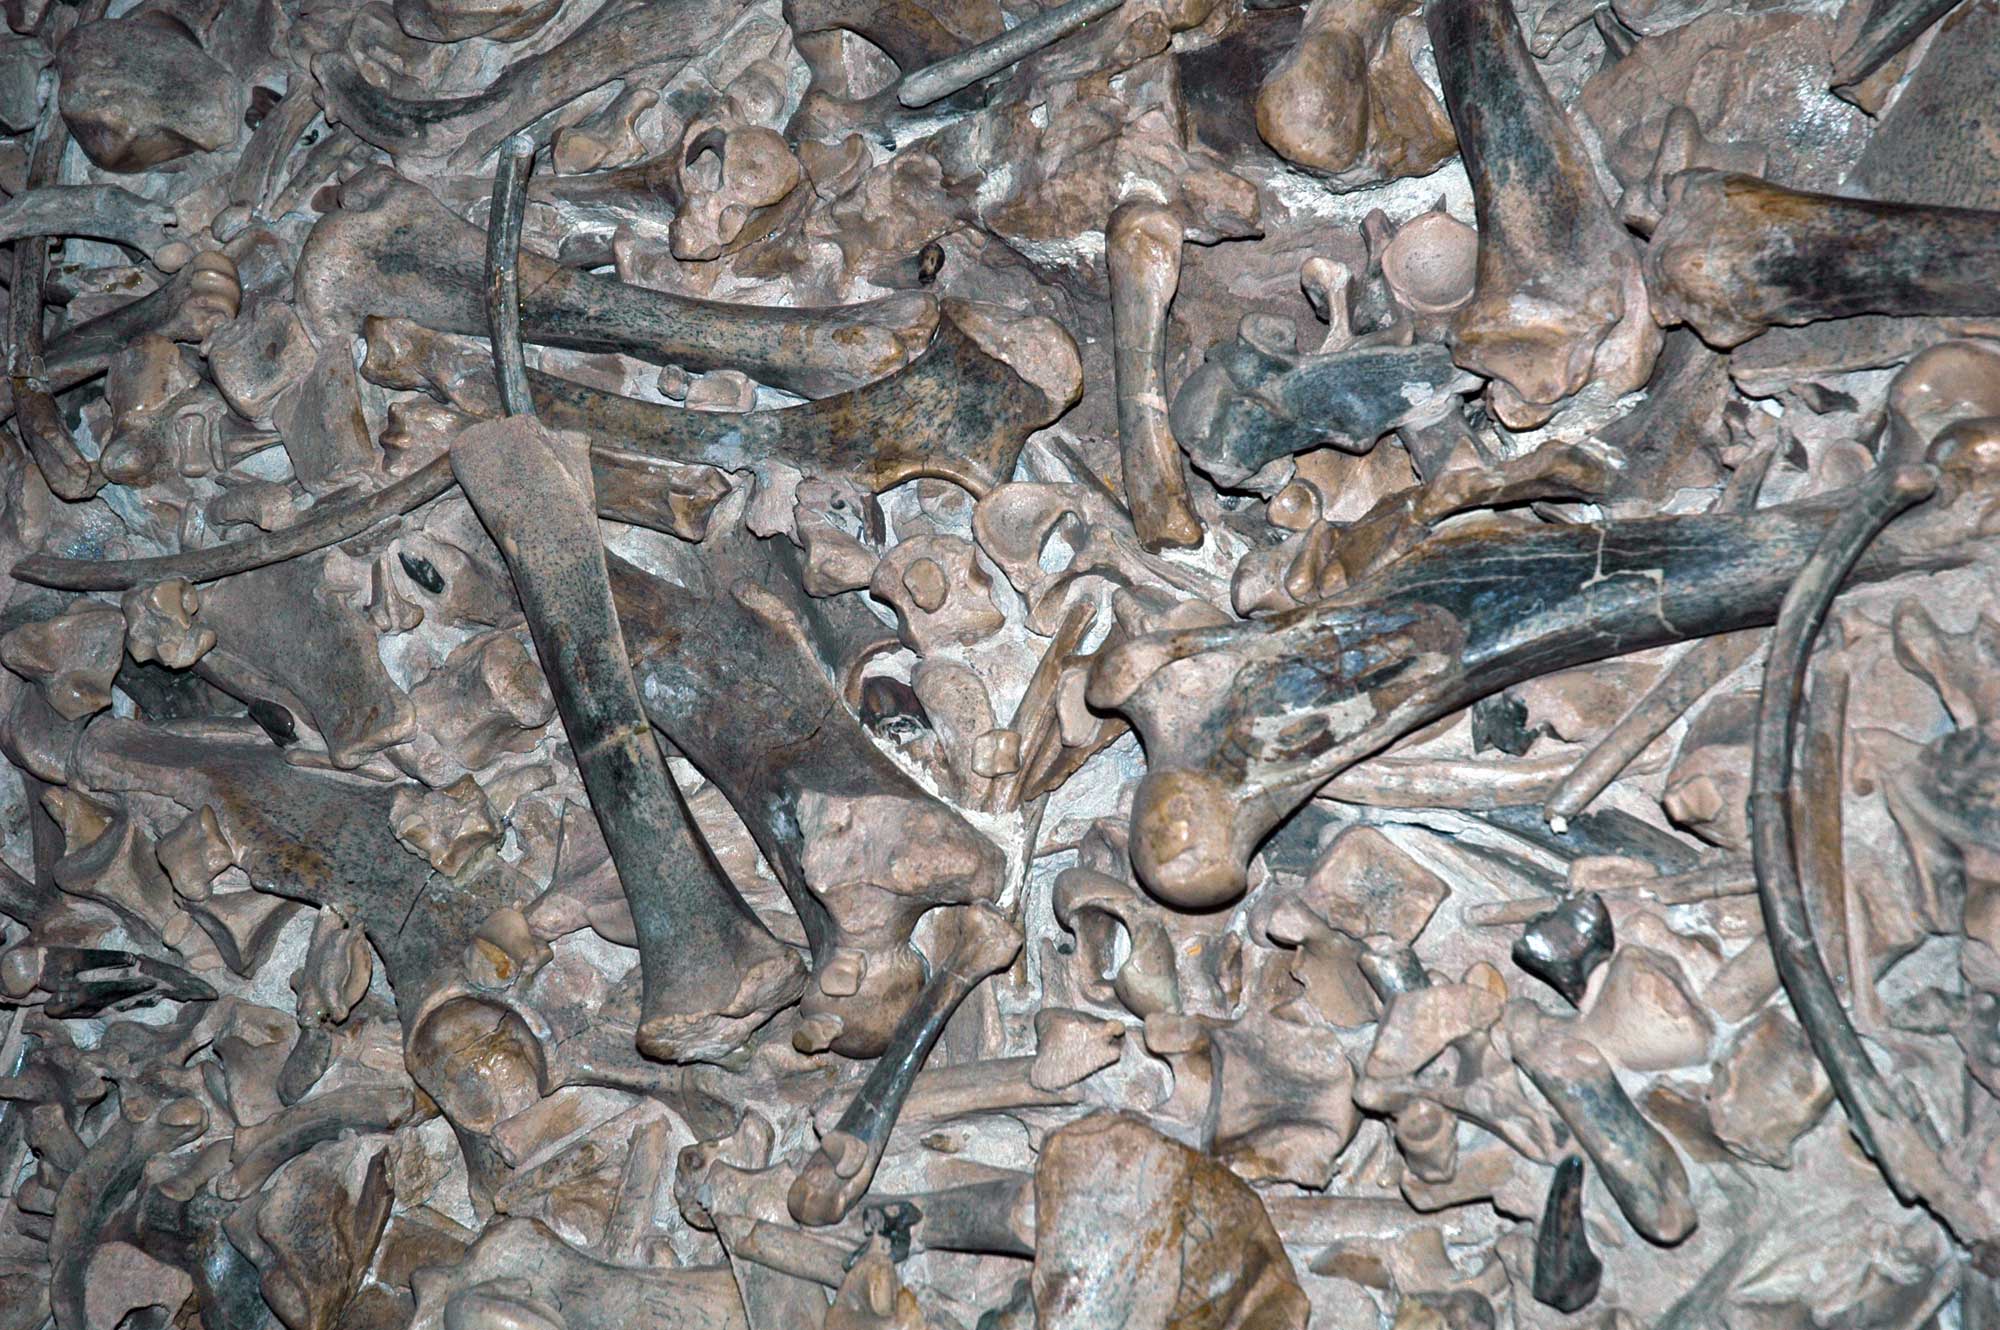 Photograph of a bed of Miocene rhino bones from the Harrison Formation of Nebraska. The photo shows a dense jumble of brown to black bones preserved on the surface of a rock.